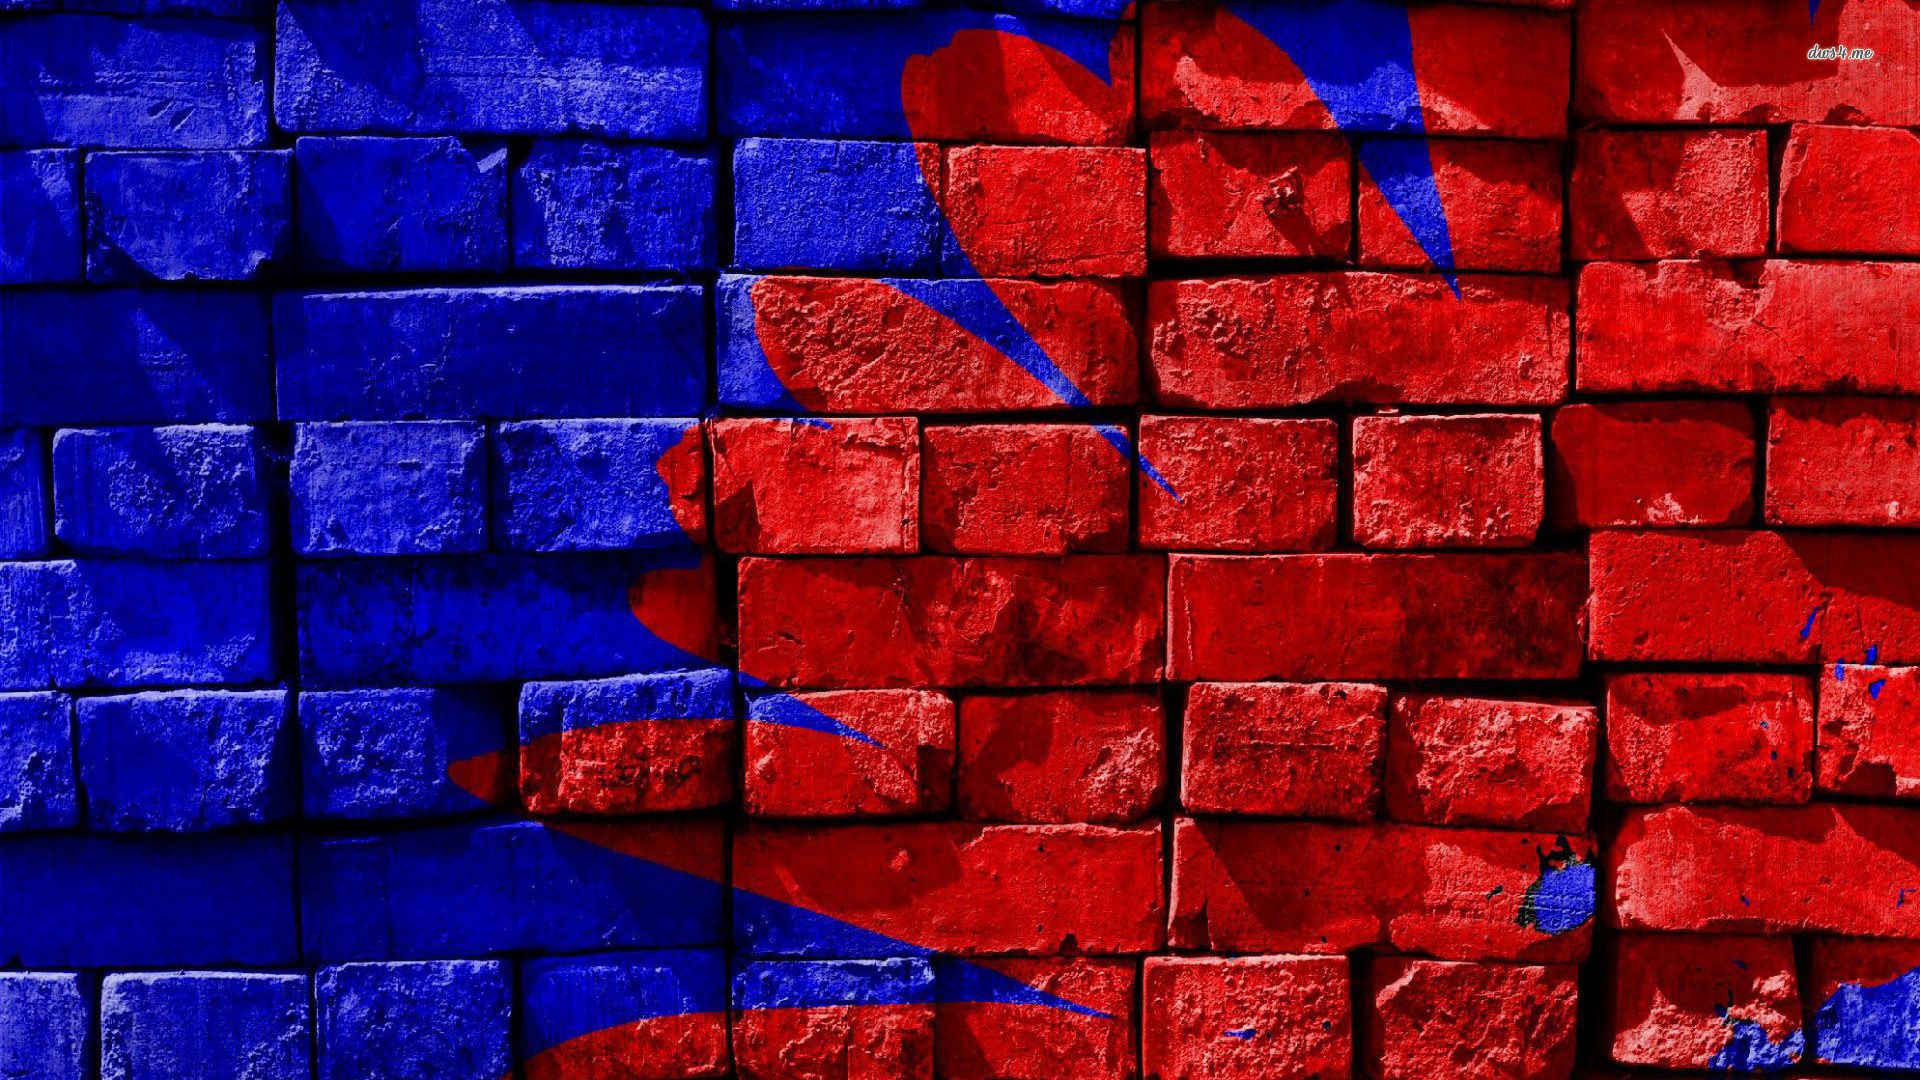 Red and blue brick wall wallpaper - Photography wallpapers - #30112